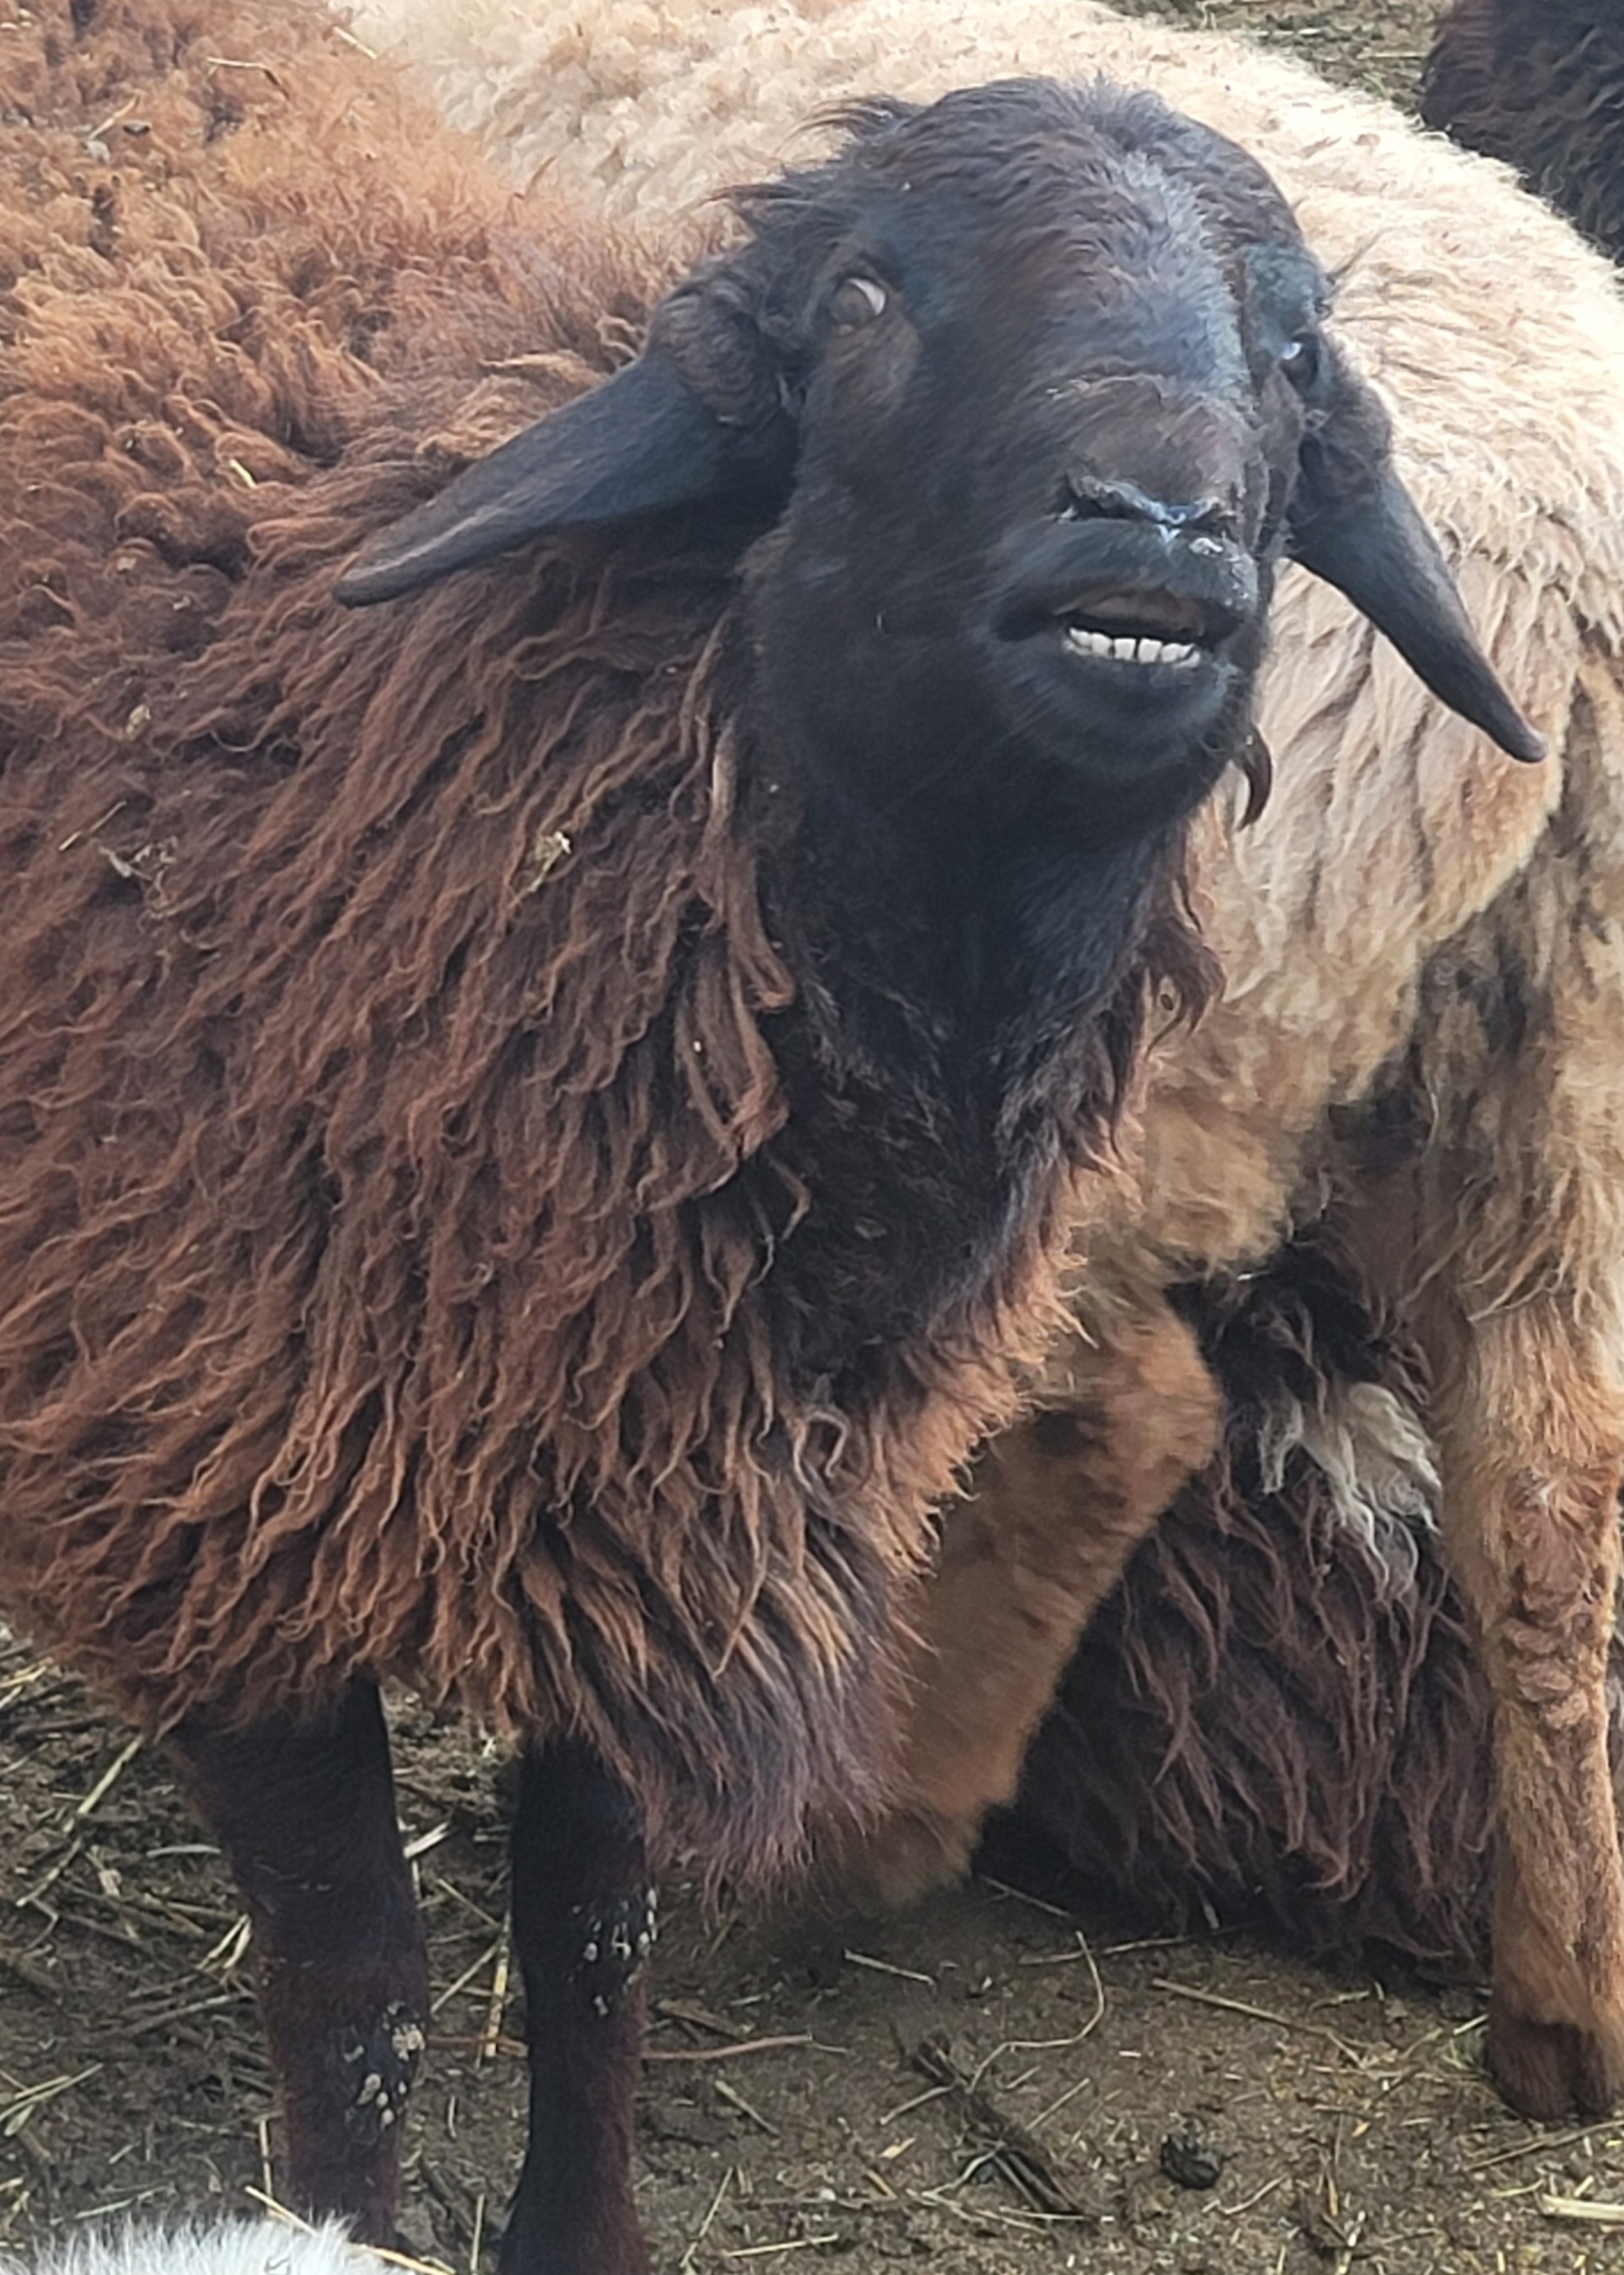 sheep with brown wool and a black head, looking slightly upwards with it's mouth open